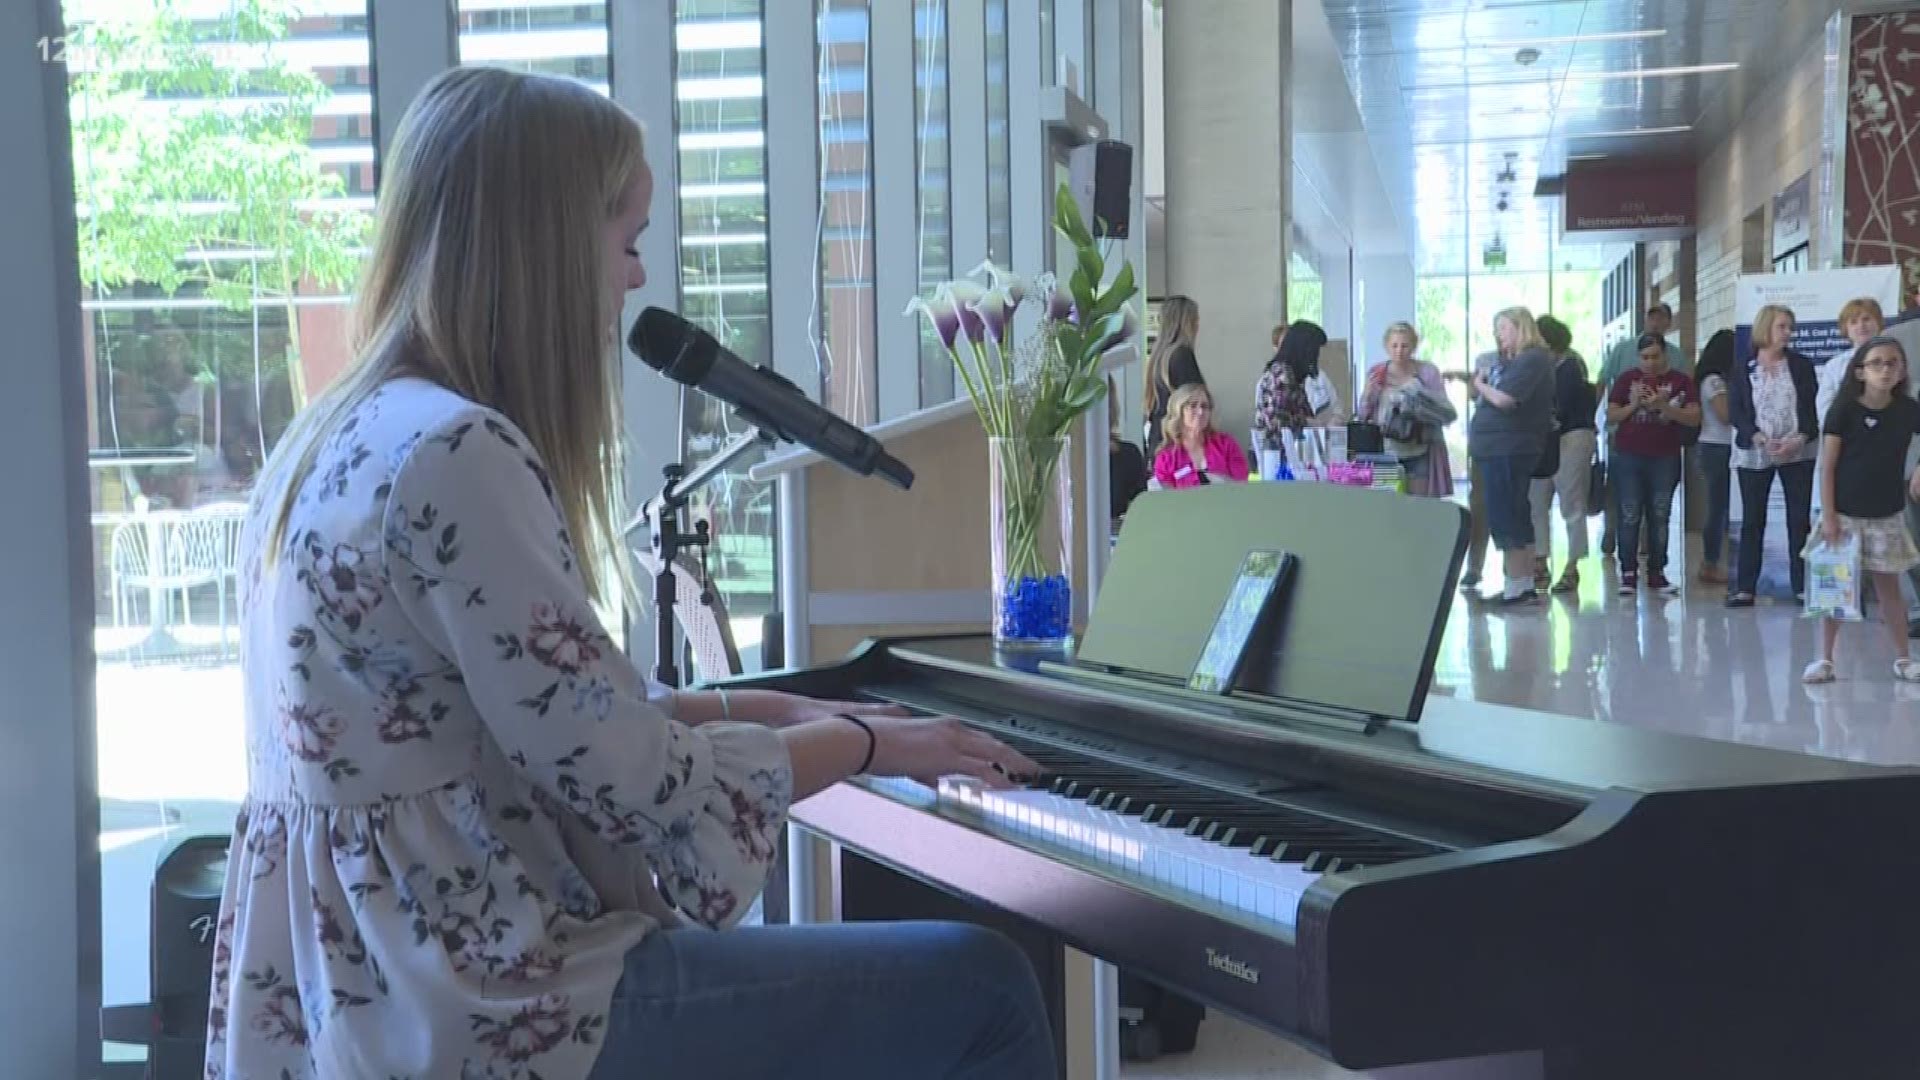 Today AGT star Evie Claire sang to cancer survivors, patients and staff at the Banner MD Anderson Cancer Center in Gilbert. It's also where Evie's father was treated.